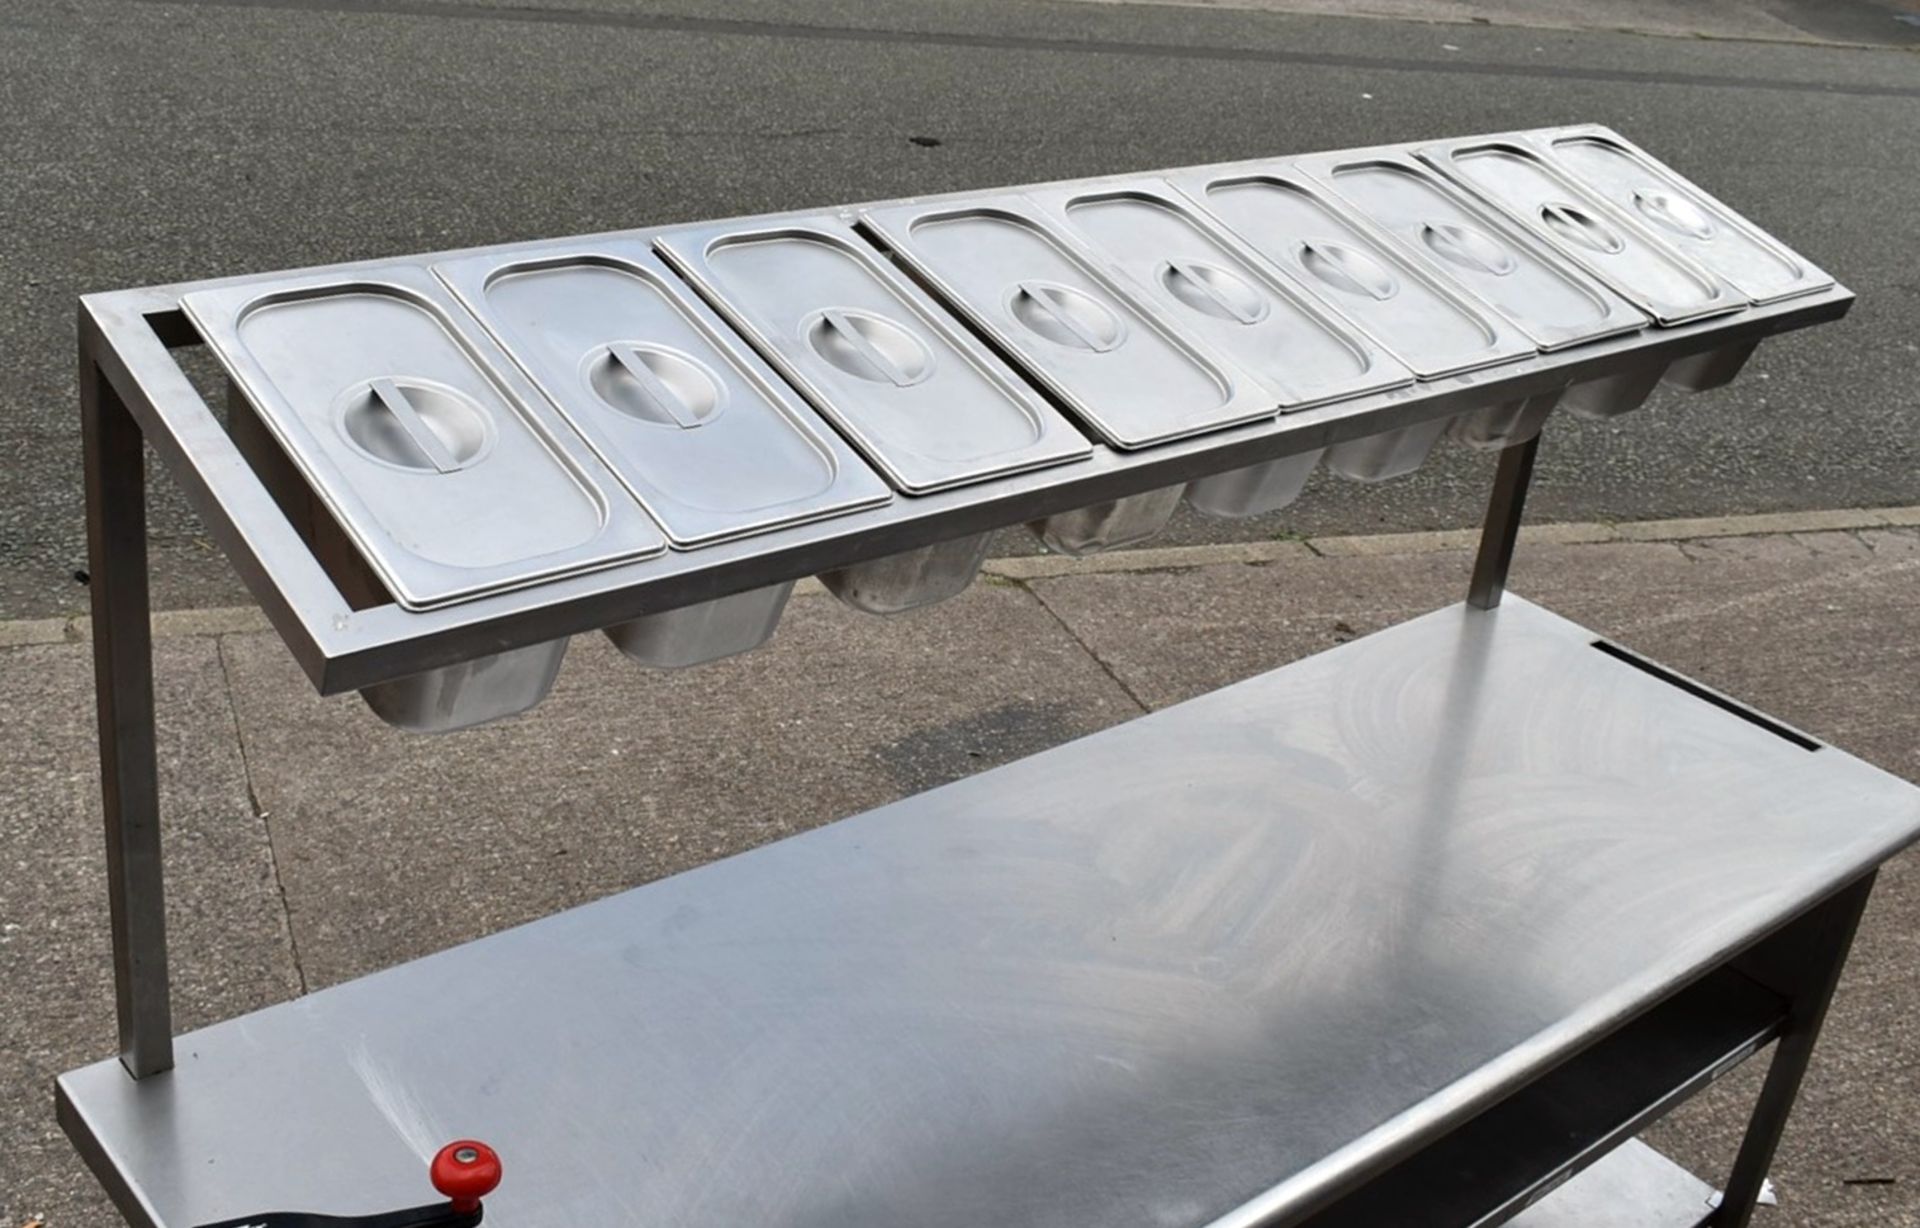 1 x Stainless Steel Mobile Prep Bench Featuring Overhead Pizza Topper Shelf With 9 Gastro Topper Pan - Image 8 of 17